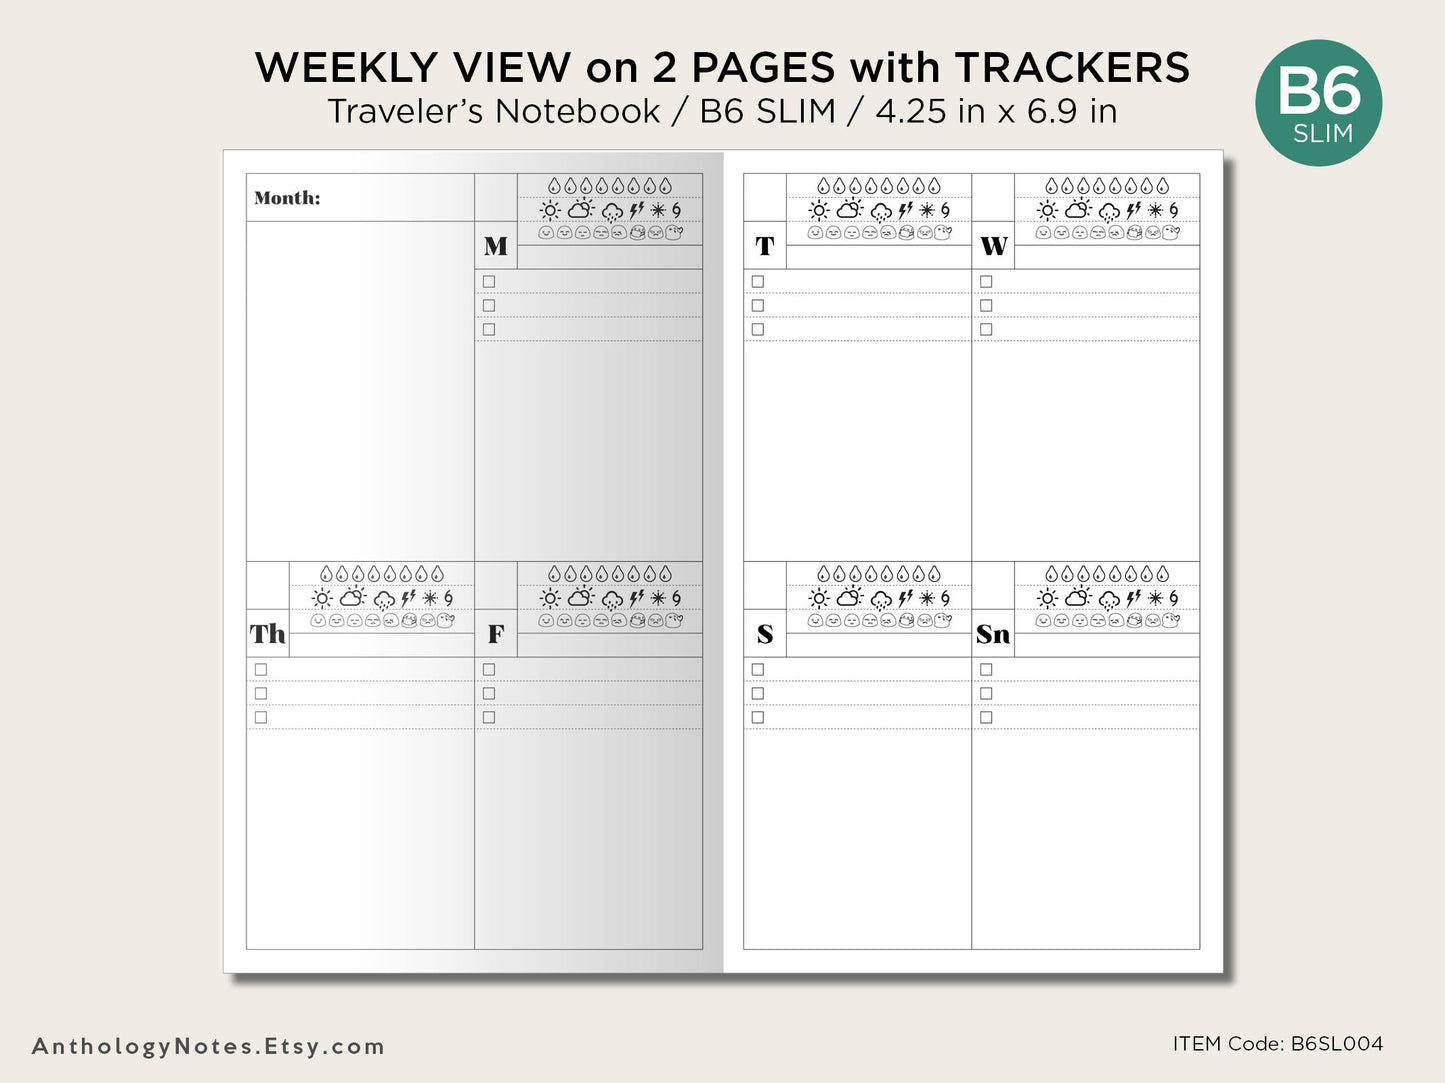 B6 SLIM Weekly View Insert - Traveler's Notebook - Mood, Weather and Water tracker - Vertical Quadrant Layout